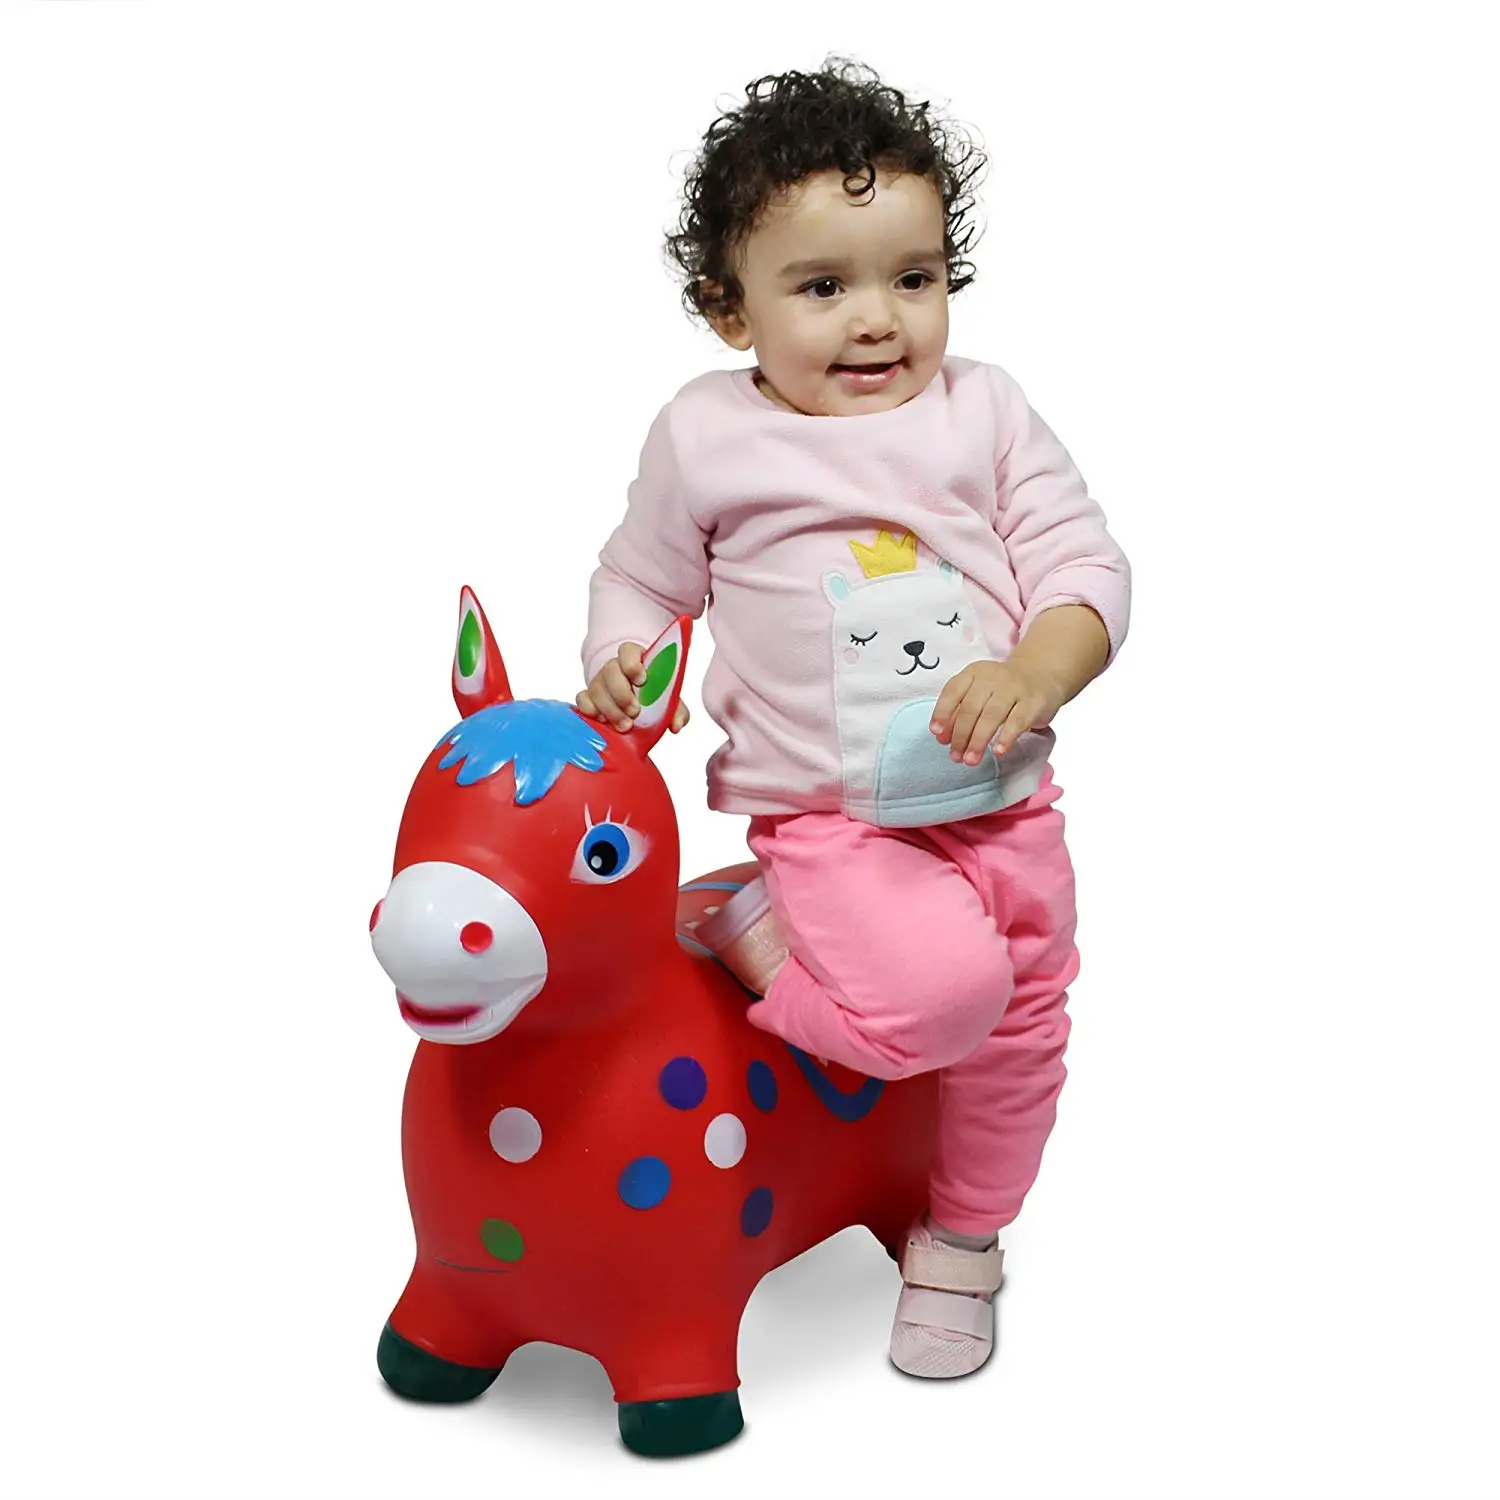 bouncy toys for babies